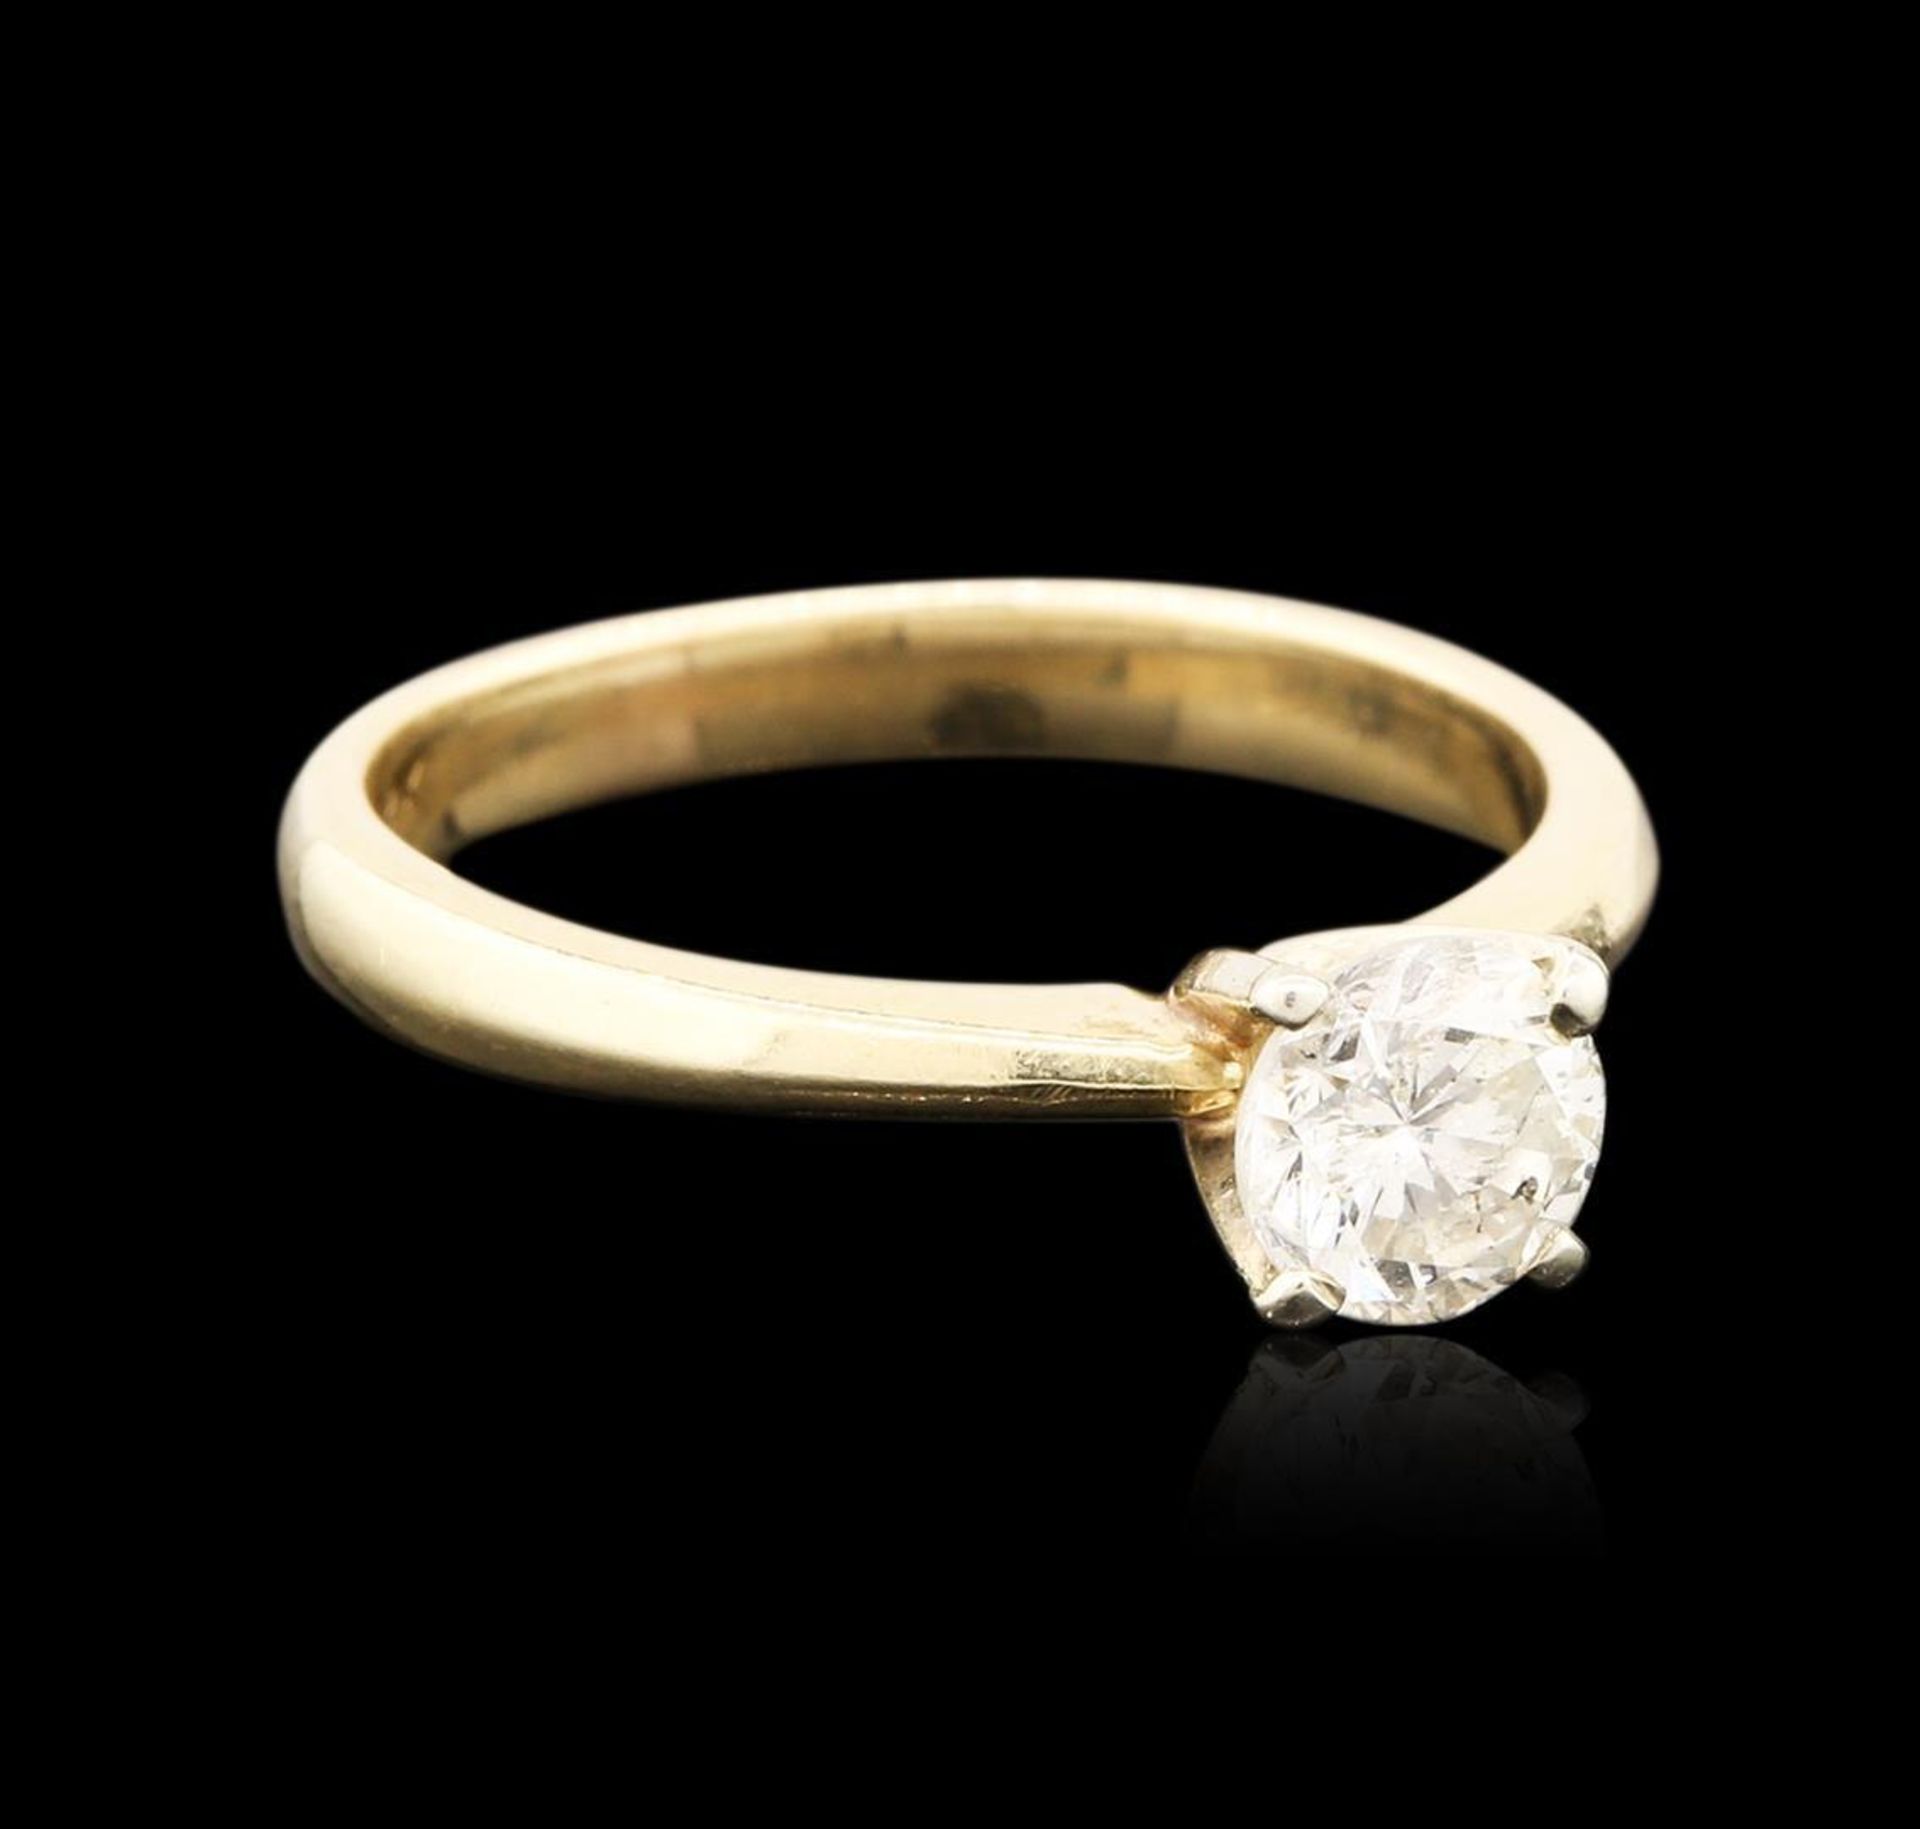 14KT Yellow Gold 0.83 ctw Round Brilliant Cut Diamond Solitaire Ring - Image 2 of 4